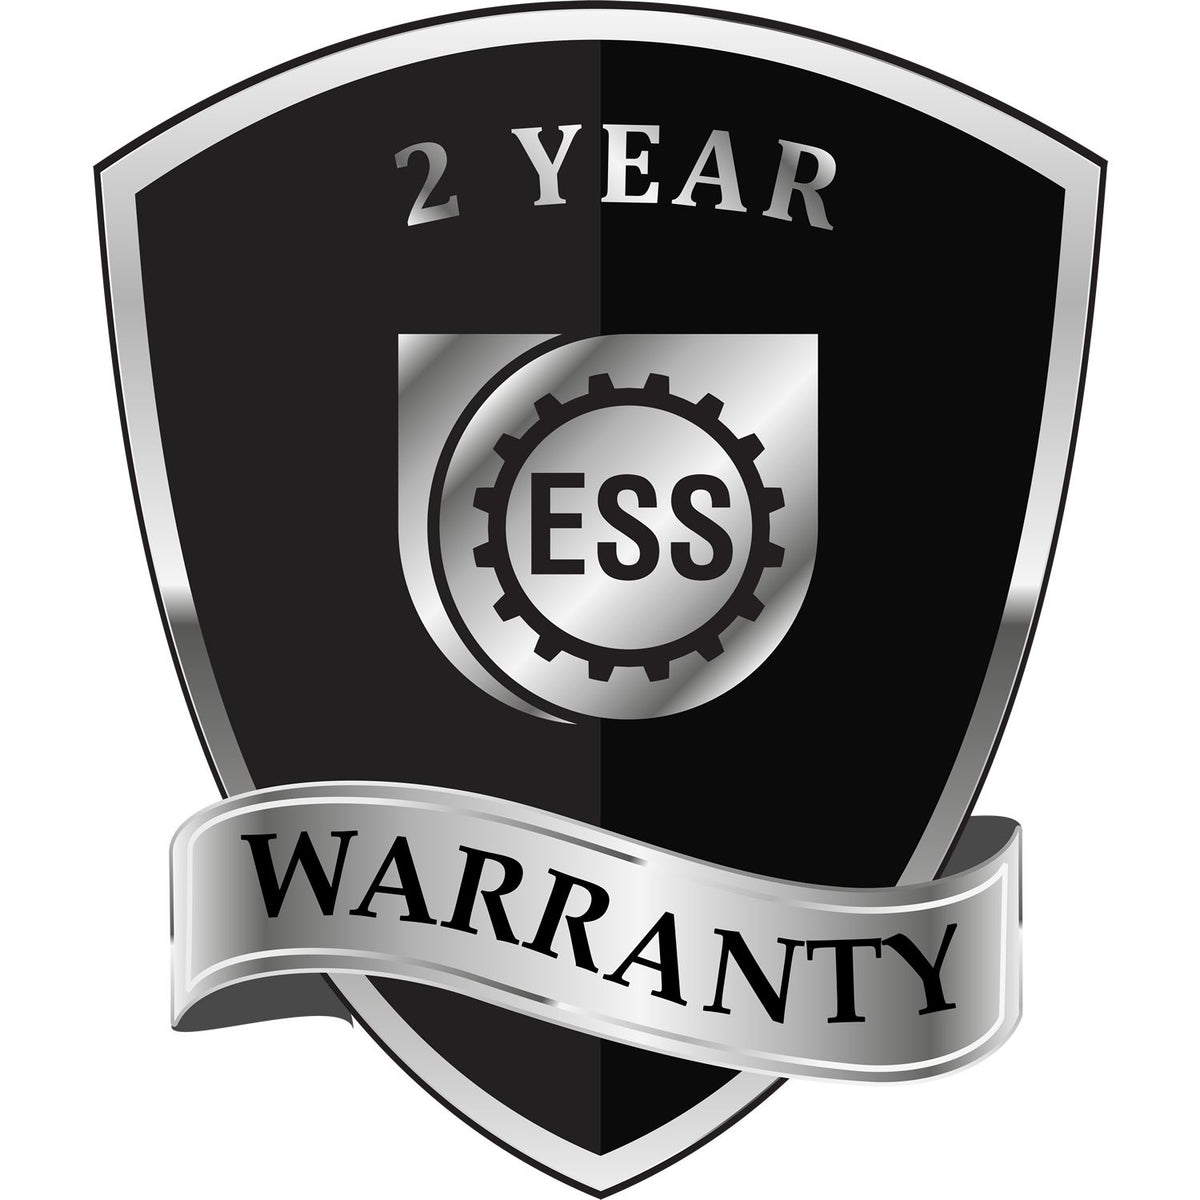 A badge or emblem showing a warranty icon for the Long Reach Arizona PE Seal